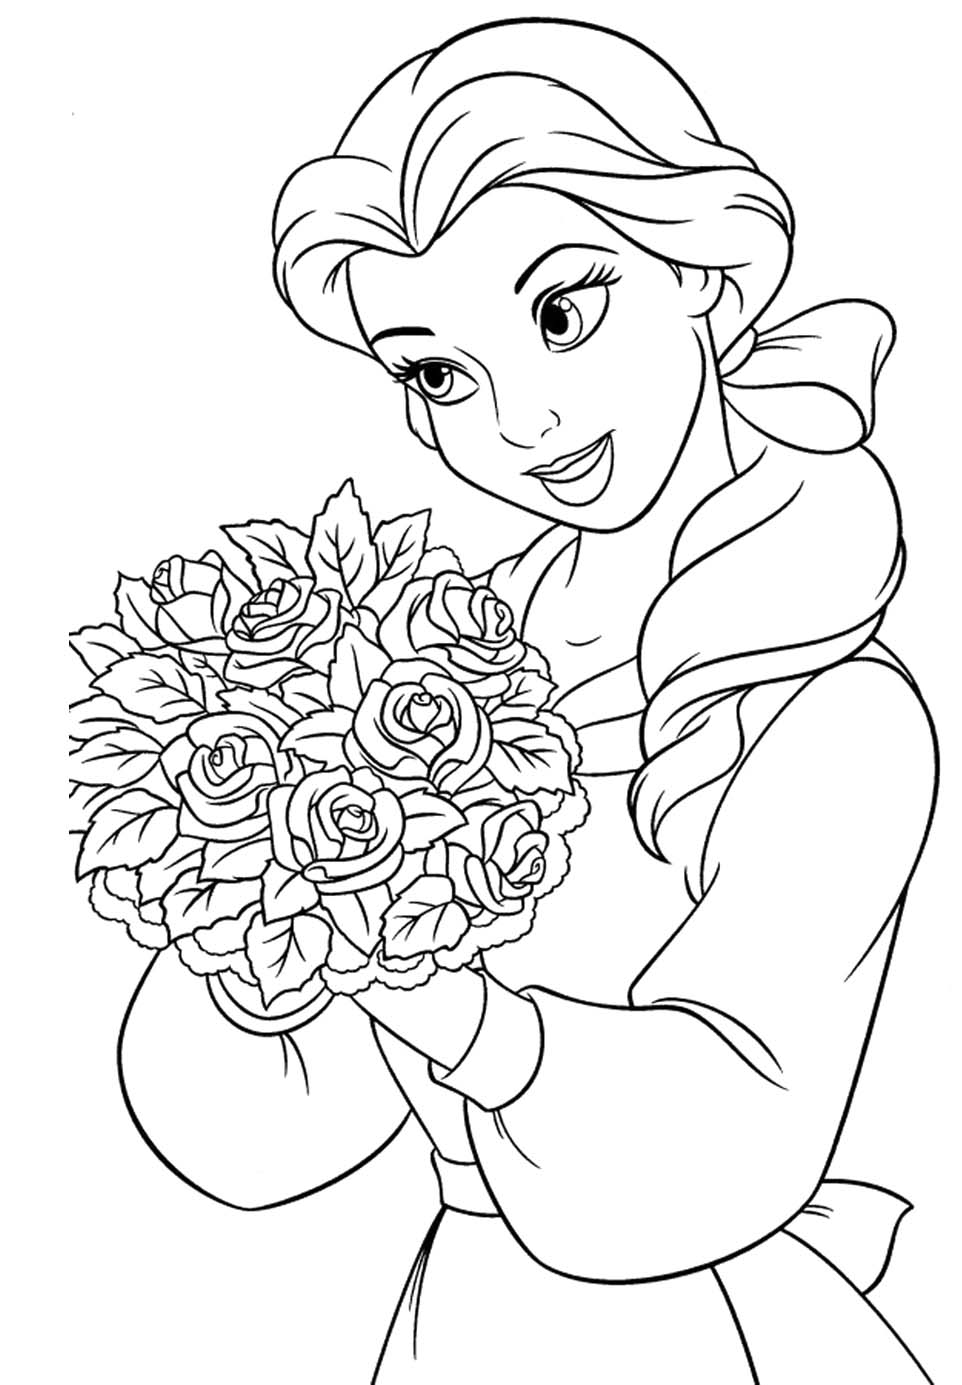 Belle Disney Princess Coloring Pages at GetColorings.com   Free ...